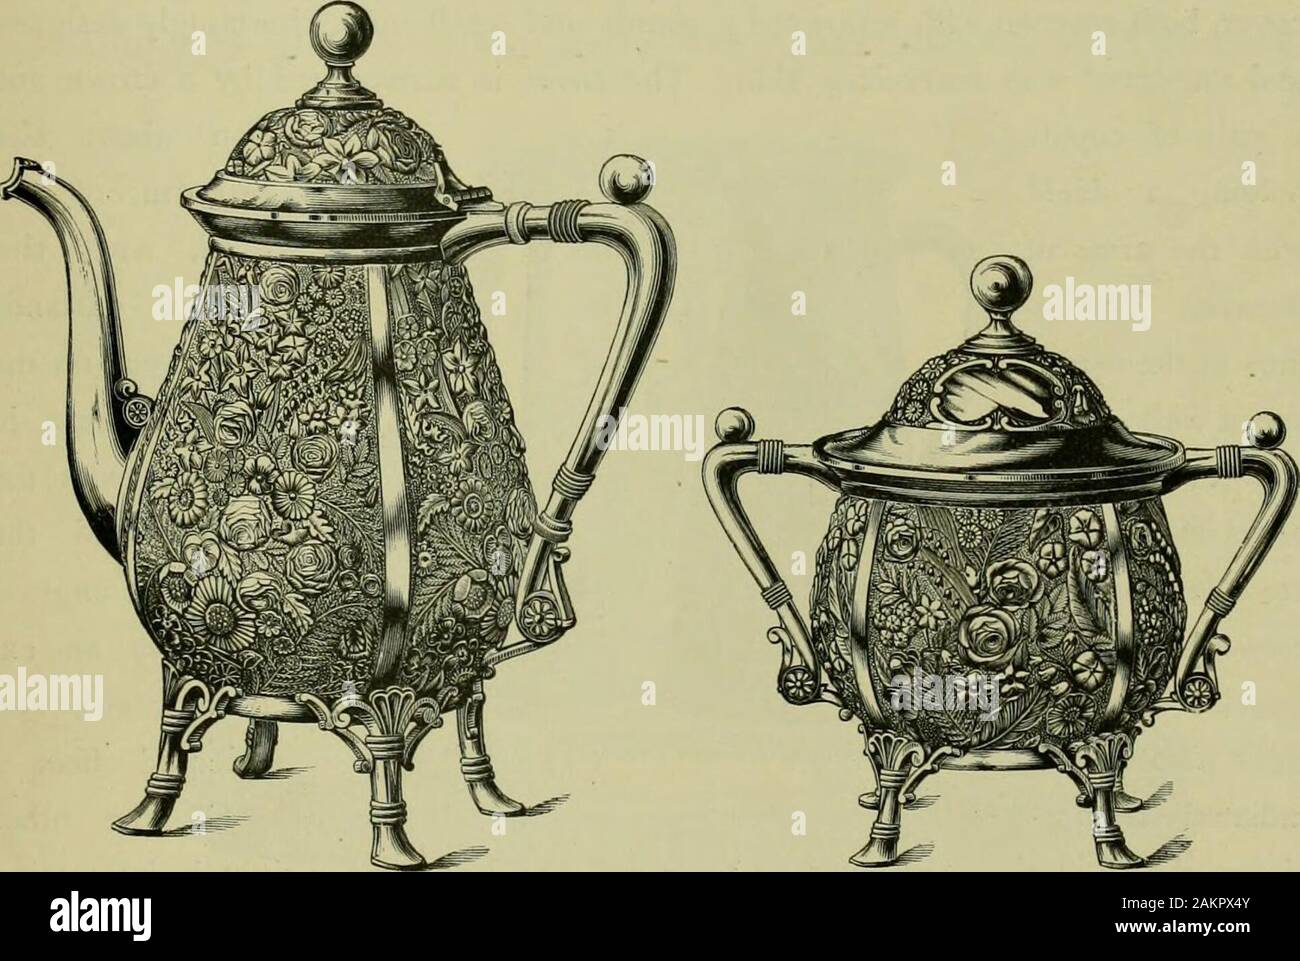 The masterpieces of the Centennial international exhibition of 1876 .. . Silver-filated Tea Serfice ? Reed ff Bar/on. Tiuititcm. ^fass, INDUSTRIAL ART. 427 be studied by die aid of a magnifying-glass. In consideration of tliese elabo-rate excellencies, this Cup may well be placed with the group named in thebeginning of this description, as one of the chefs-dveiivre of the Elkingtonexhibit. The Bronze exhibit in the Italian Court was scarcely such as the reputa-don of the Italians for art-works in this metal would lead us to expect; butsuch as it was, the collection could not fail of interest o Stock Photo